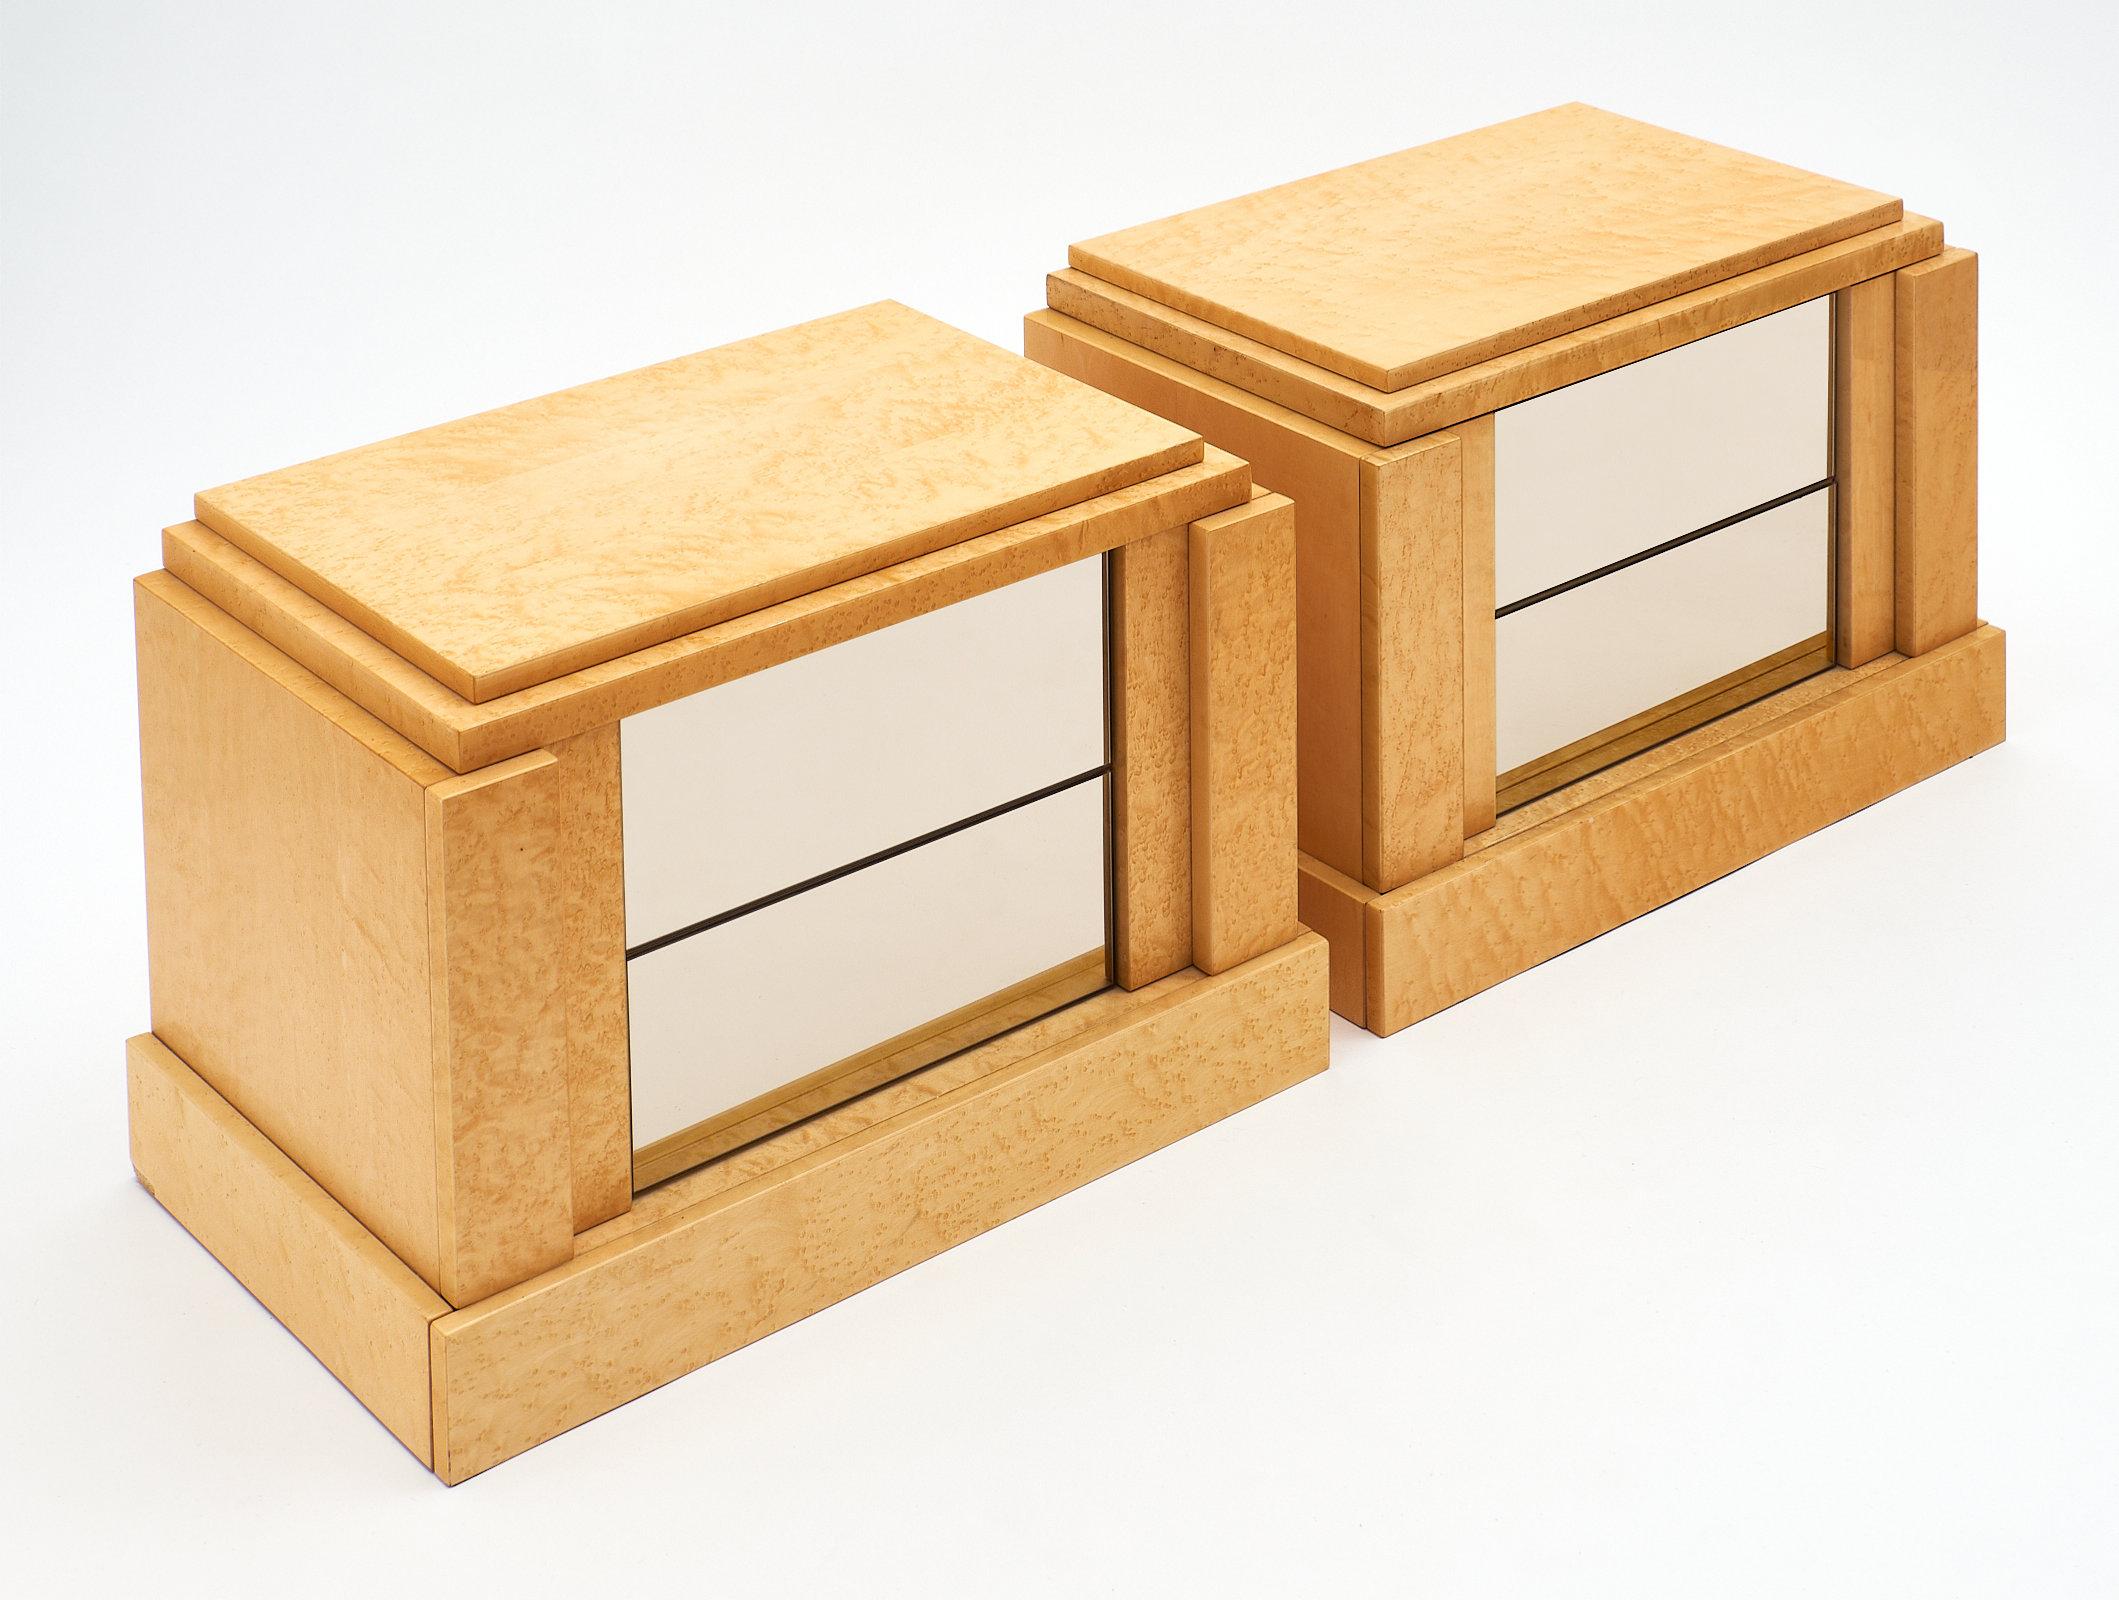 Modernist burled wood side tables made of maple and featuring smoked glass drawer fronts. We love the classic feel of this pair. They are finished with a high gloss lacquer. Each has two drawers with a push-open mechanisms in excellent working